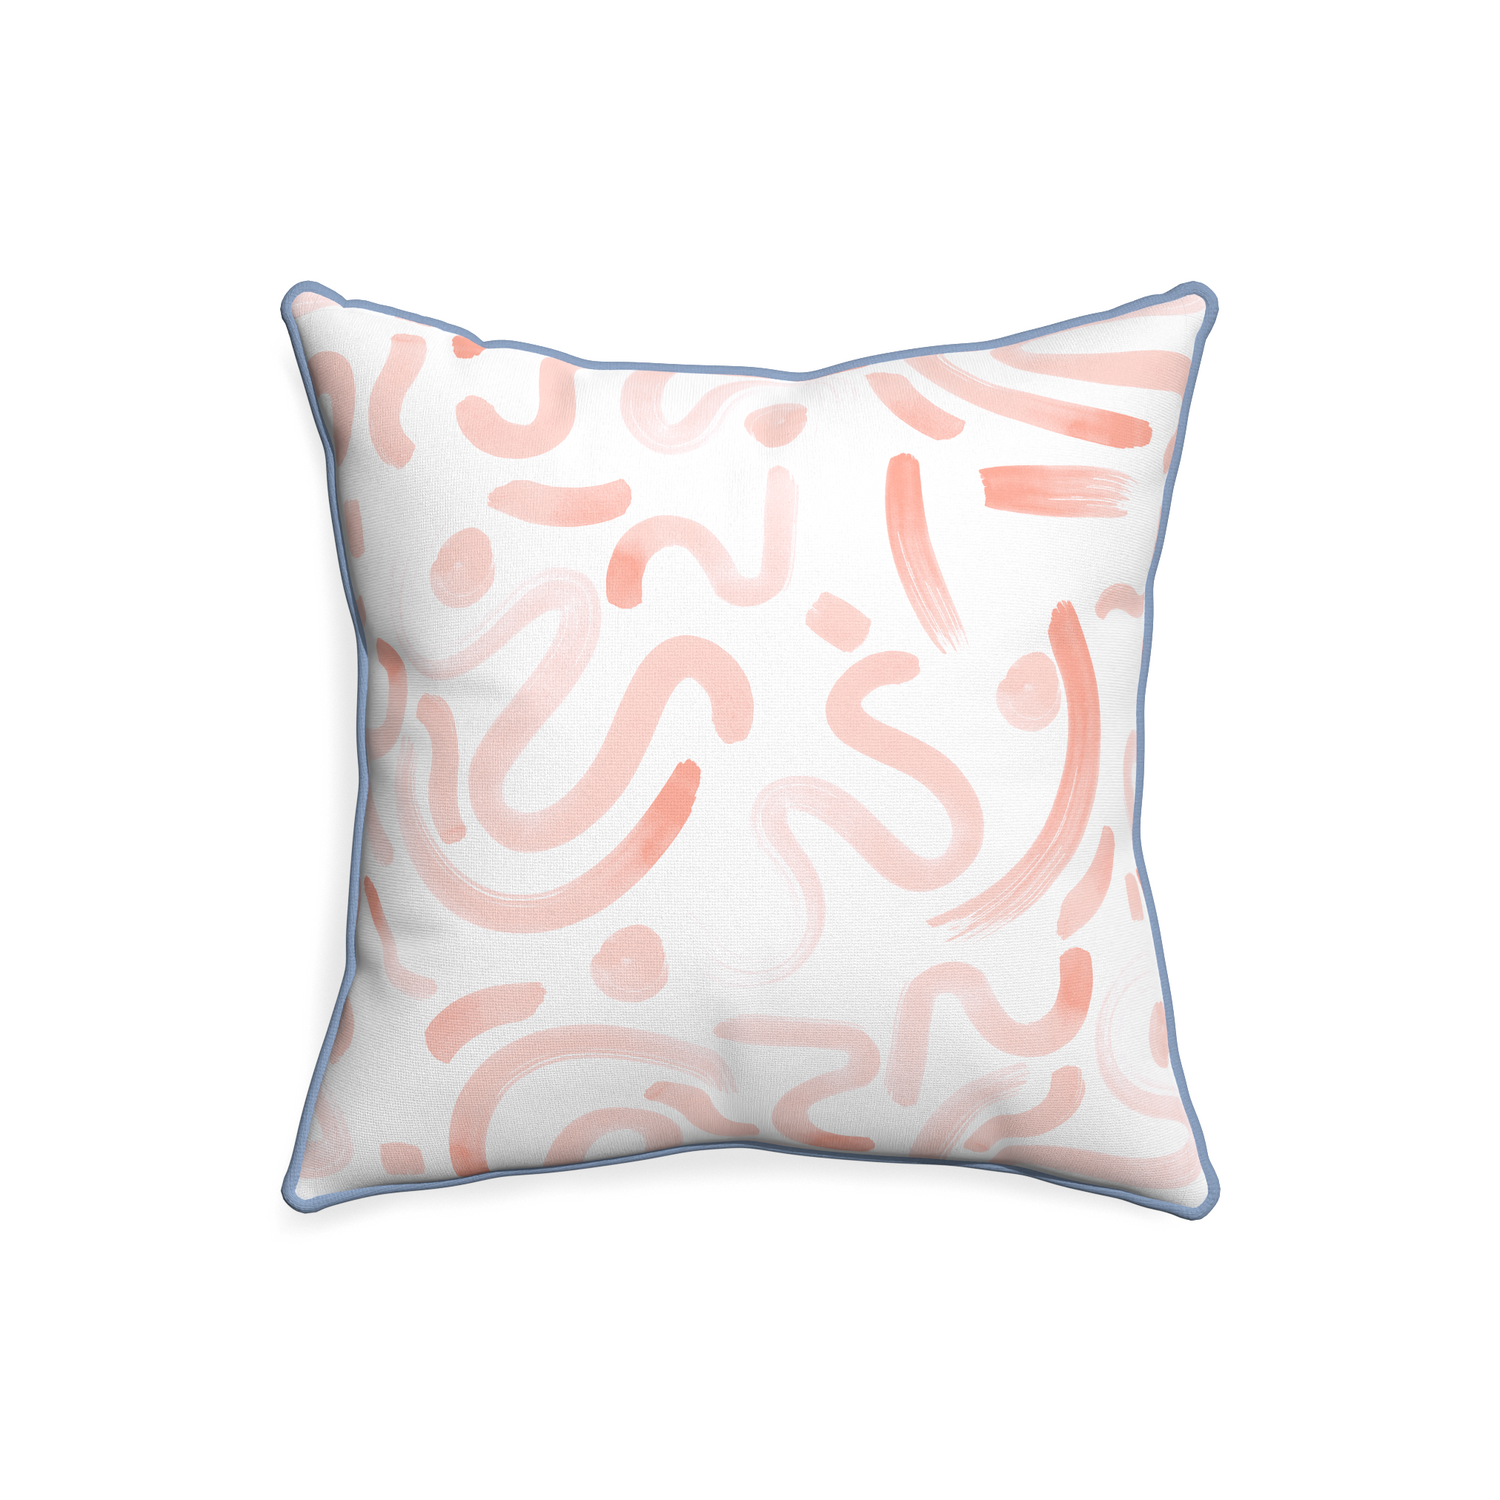 20-square hockney pink custom pink graphicpillow with sky piping on white background